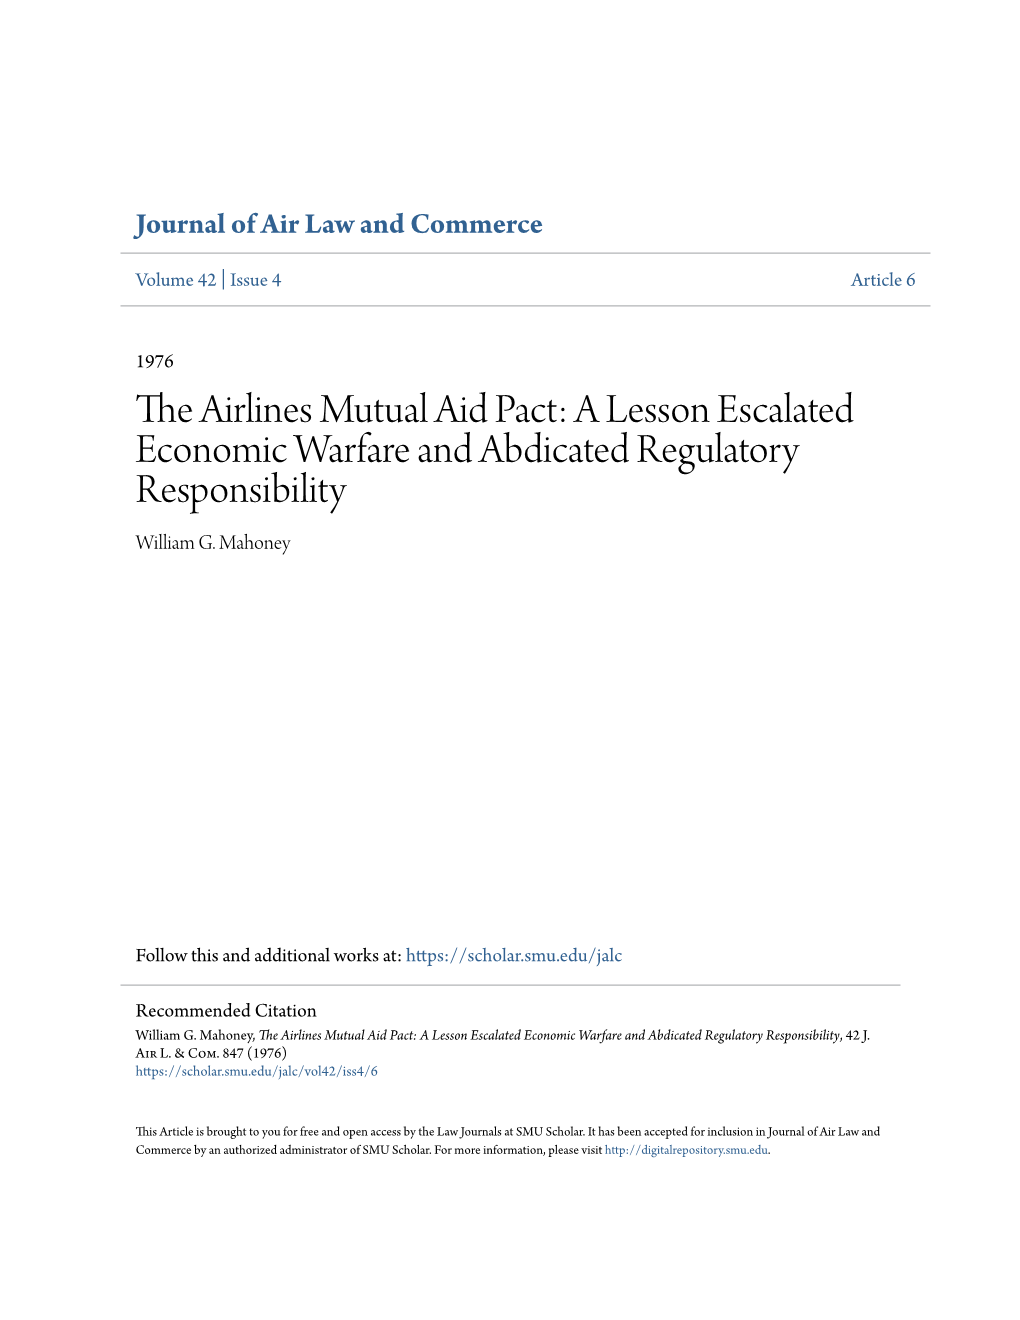 The Airlines Mutual Aid Pact: a Lesson Escalated Economic Warfare and Abdicated Regulatory Responsibility William G